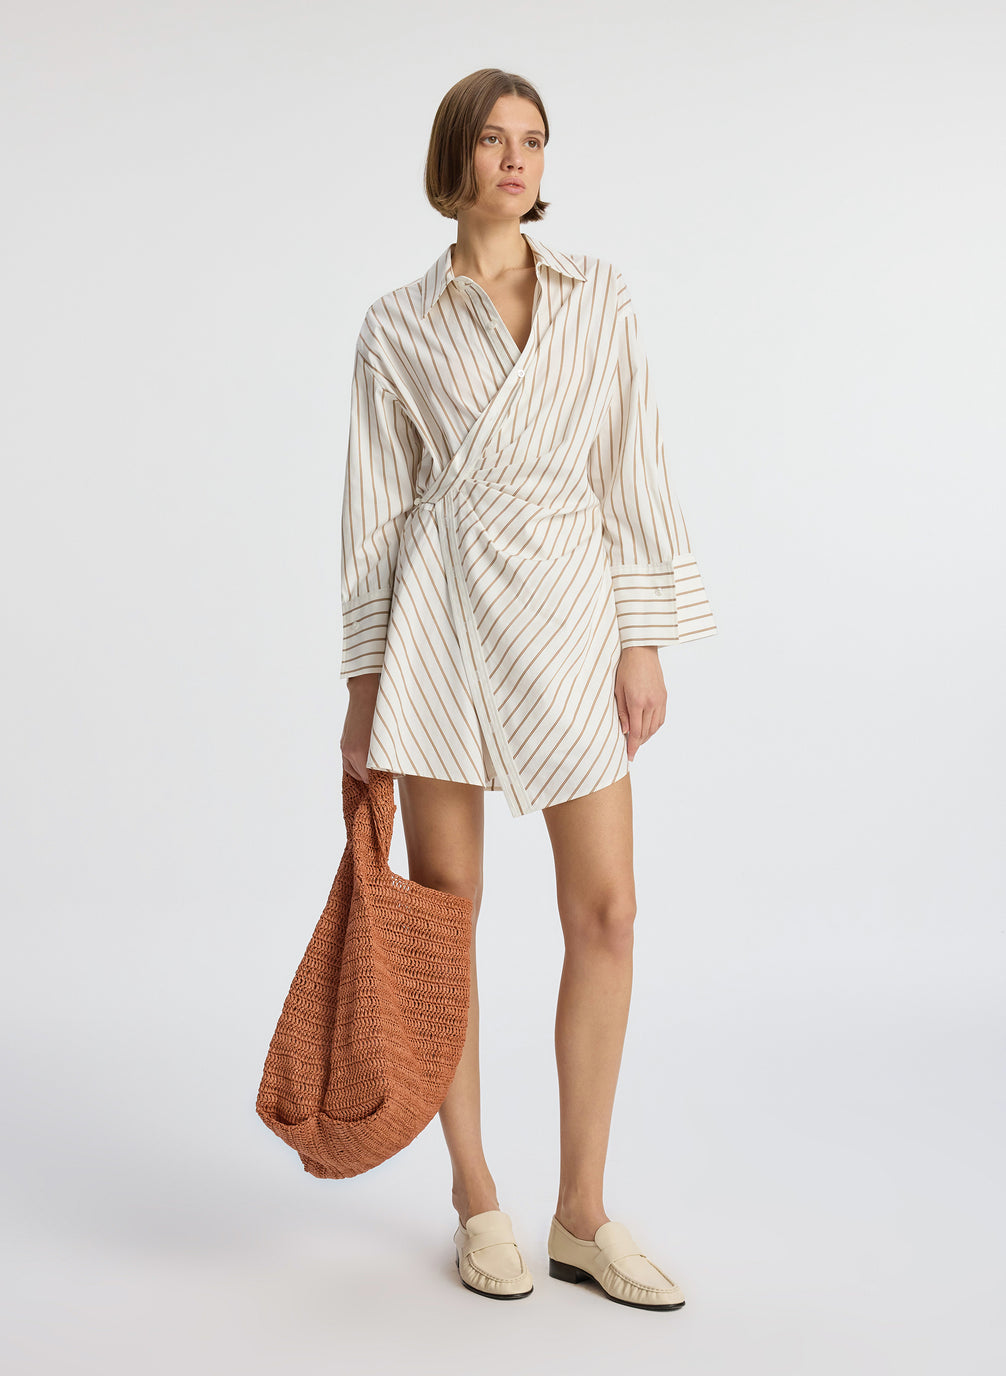 Front view of woman wearing cream and brown striped wrapped shirtdress